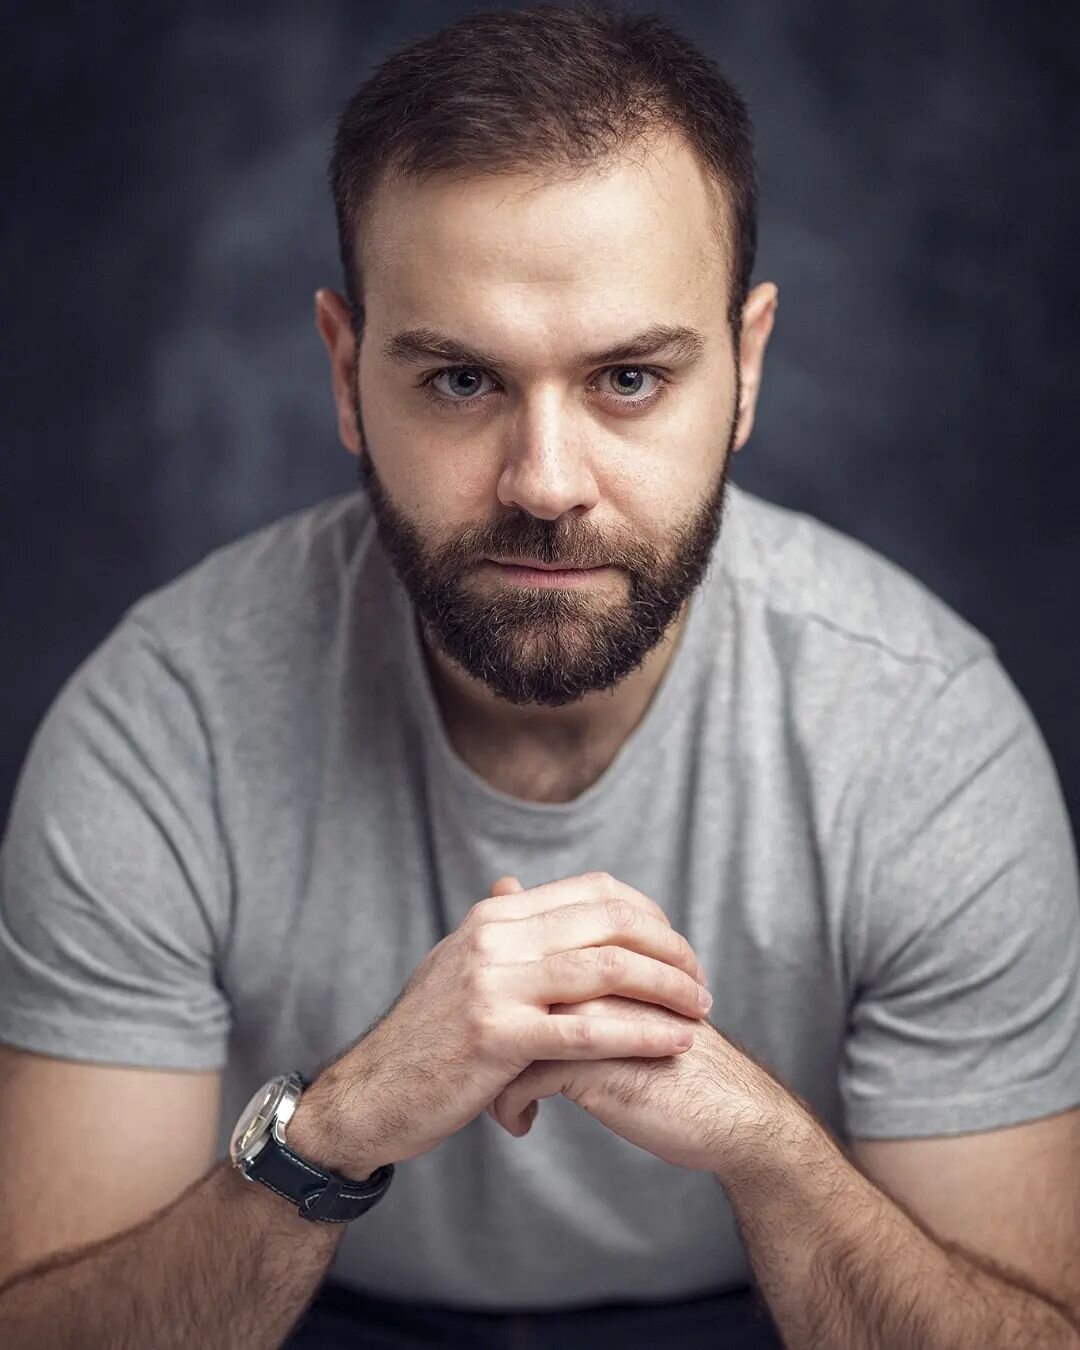 Name: Giuliano Didio
Playing age: 27-35

Giuliano is an Italian actor who's made Helsinki his home. He's been honing his craft on stage for over a decade, performing both in Italian and in English.

In 2021 he landed one of the lead roles in an indie